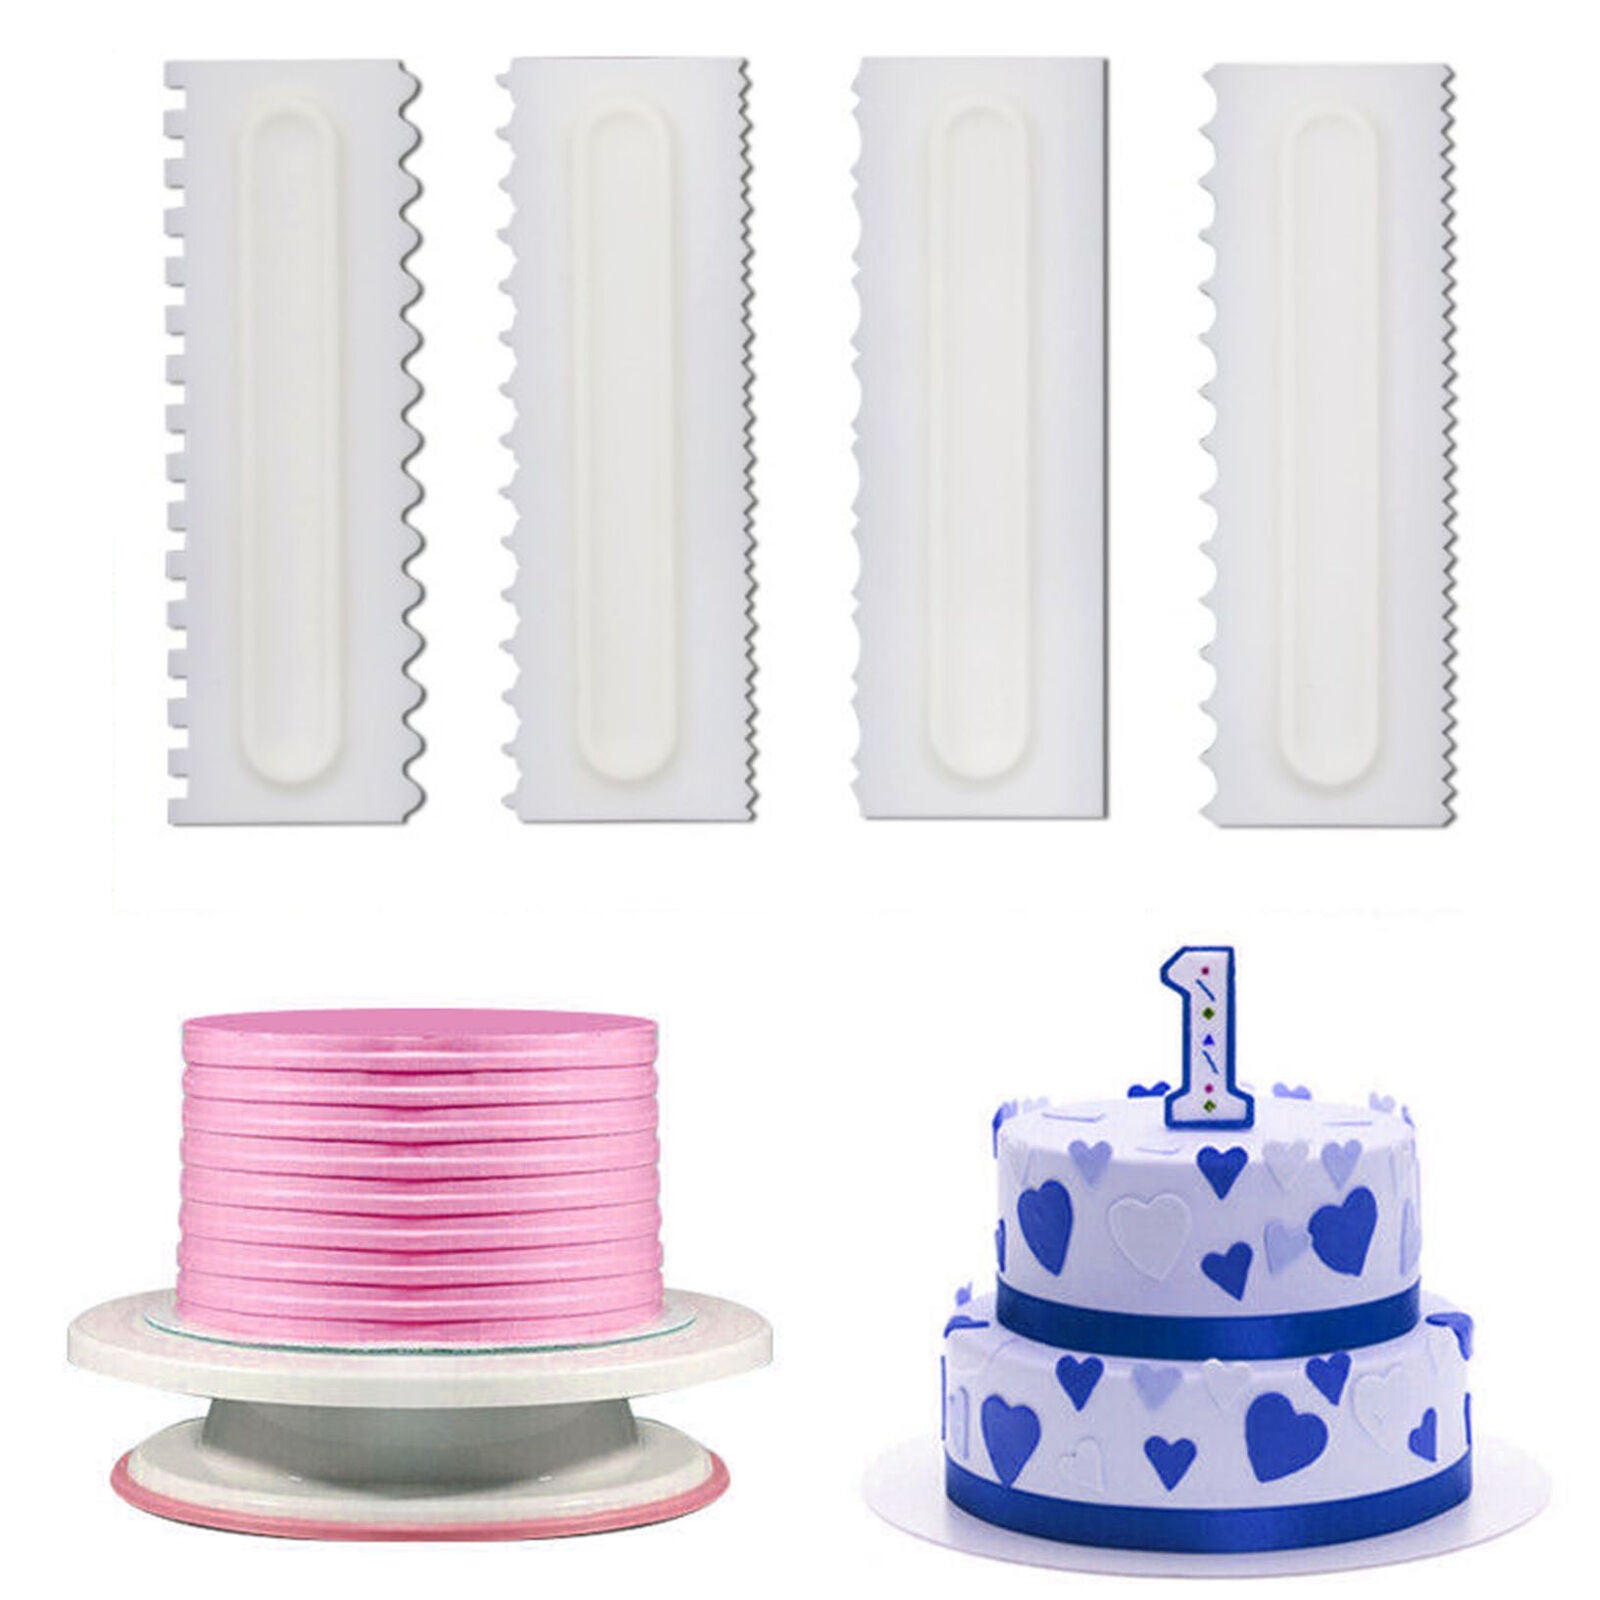 4 PCS Shapes Cake Decorating Comb Icing Smoother Cake Scraper Pastry Baking Tool